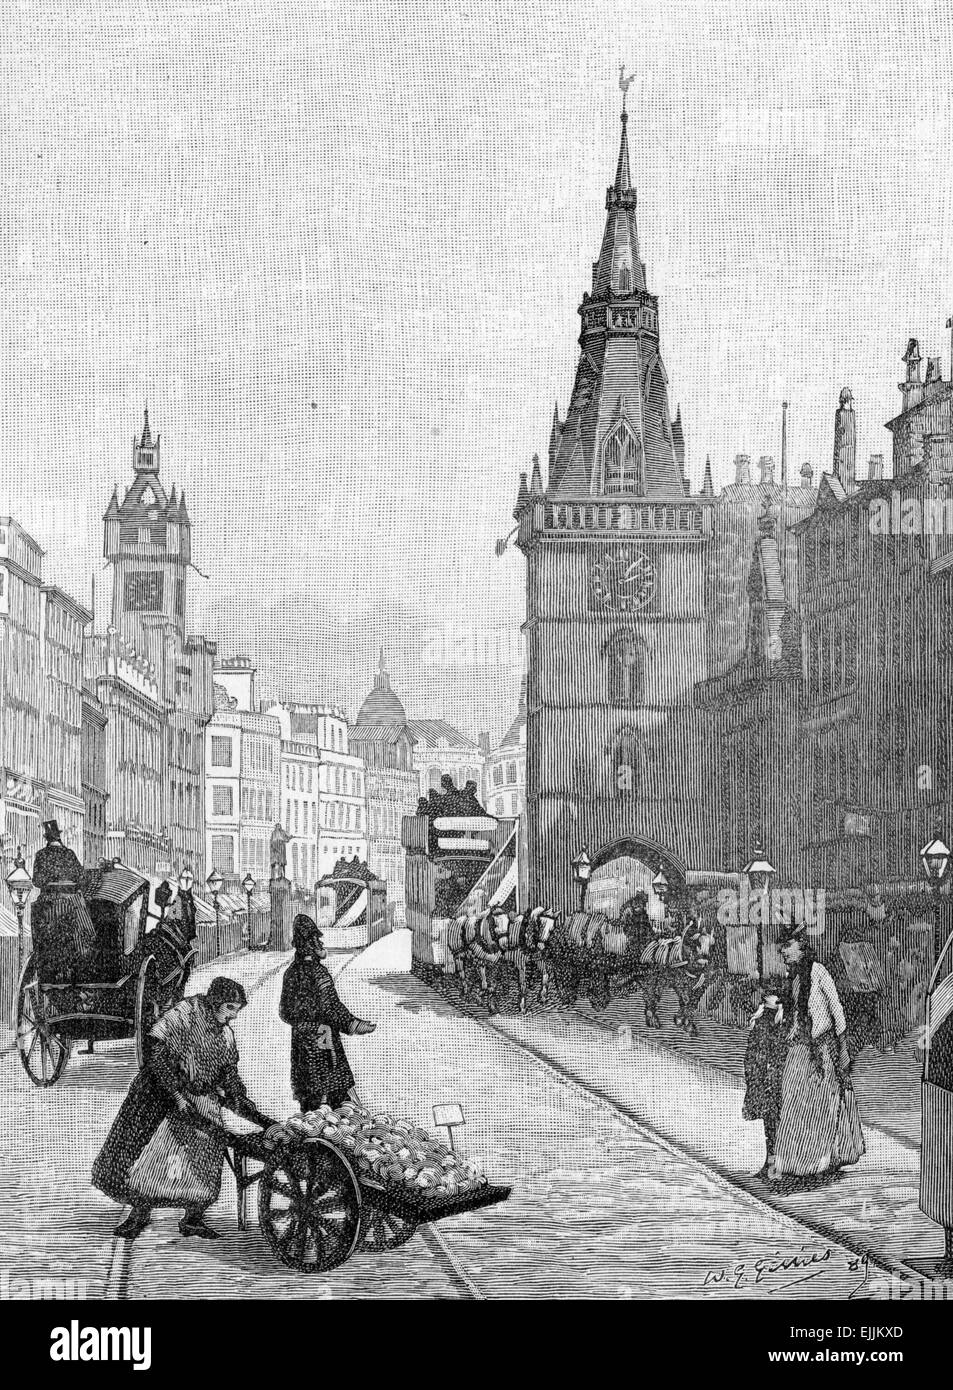 Street scene from 18th Century Glasgow, engraving from Selections from the Journal of John Wesley, 1891 Stock Photo